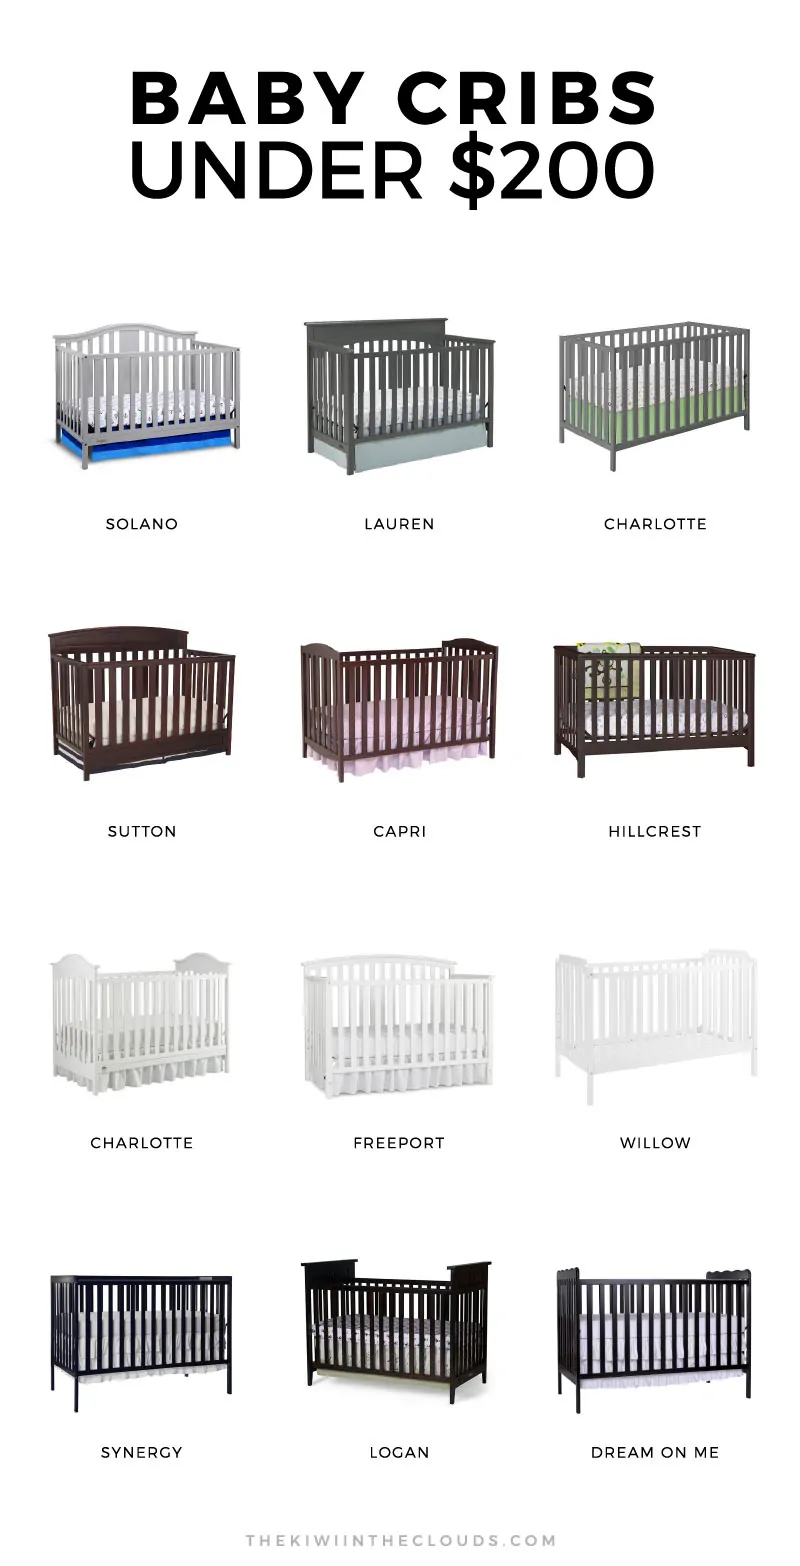 Feeling like you're way over budget on the baby's room? Then you NEED to check out these baby cribs under 200 dollars. There's an affordable crib here for everyone in every style from modern, to vintage, to traditional and more!